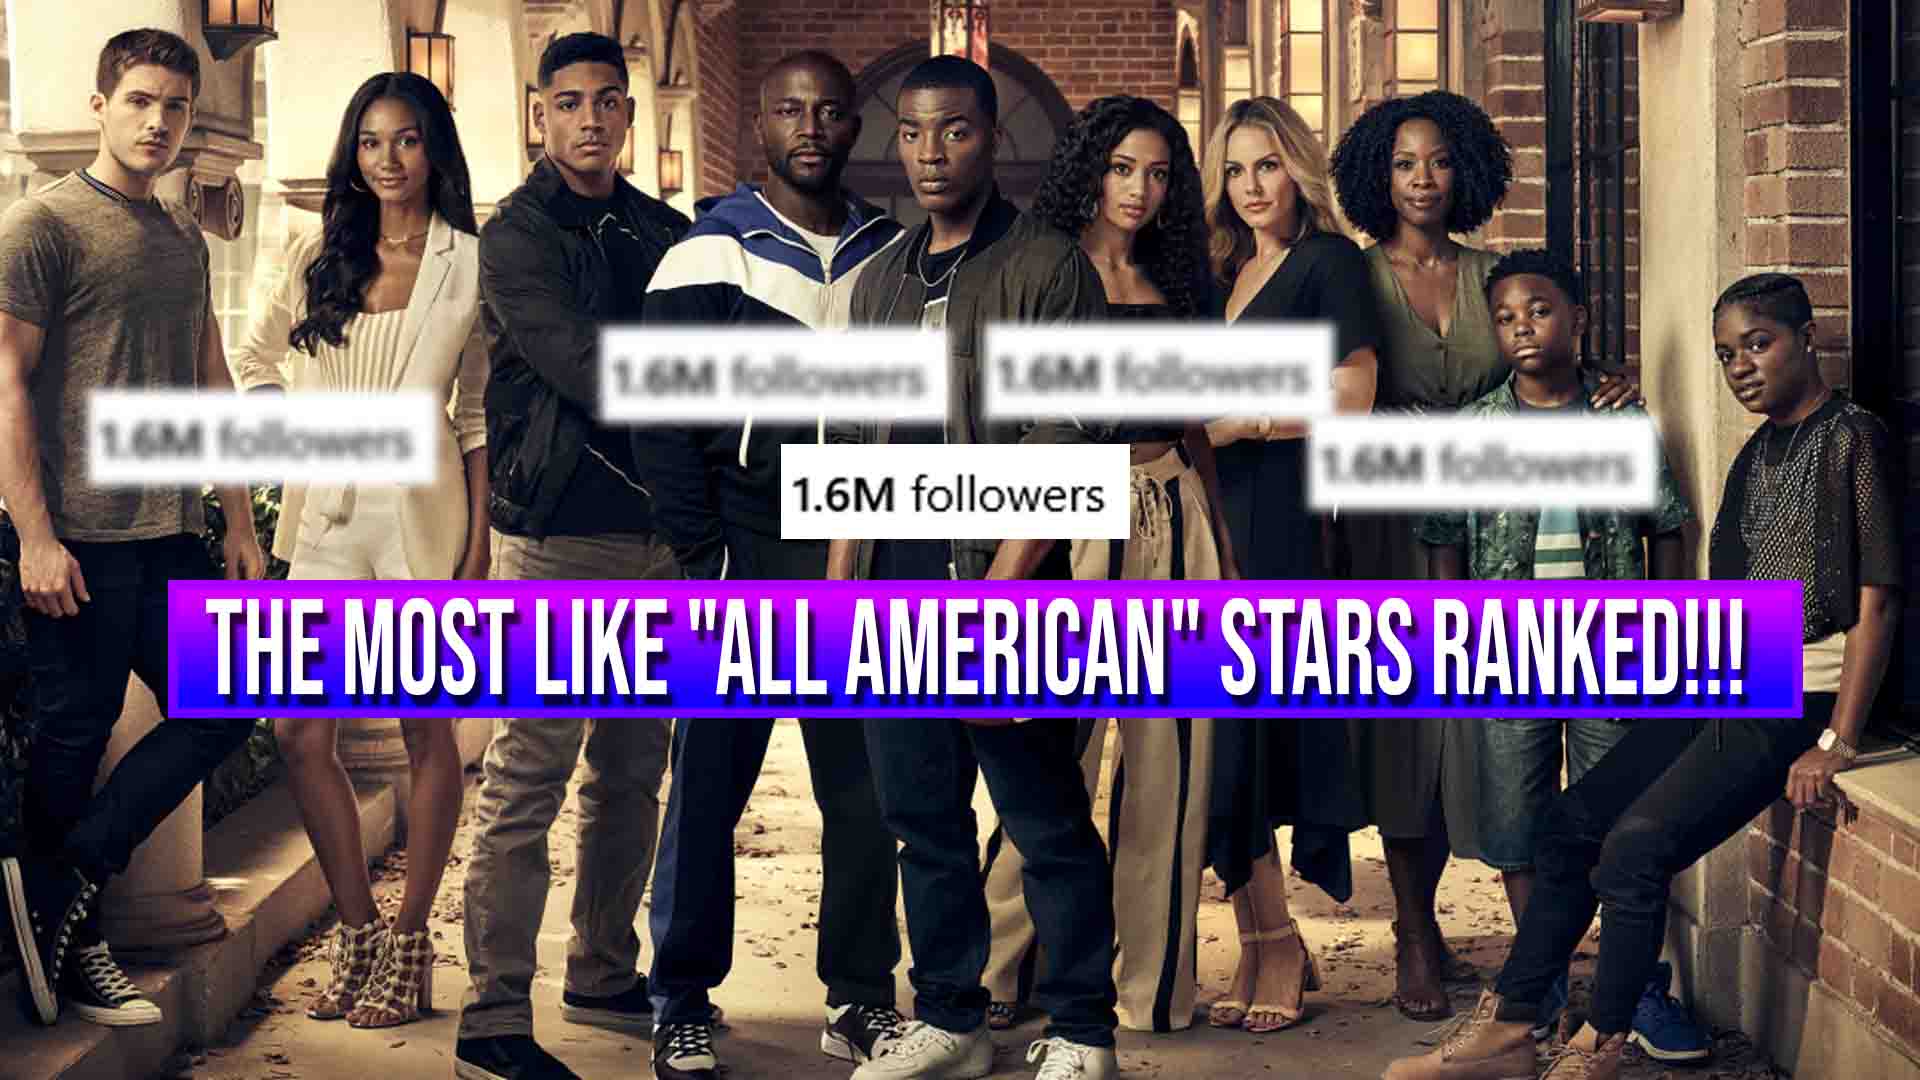 The Most Like “All American” Stars Ranked From Lowest to Highest